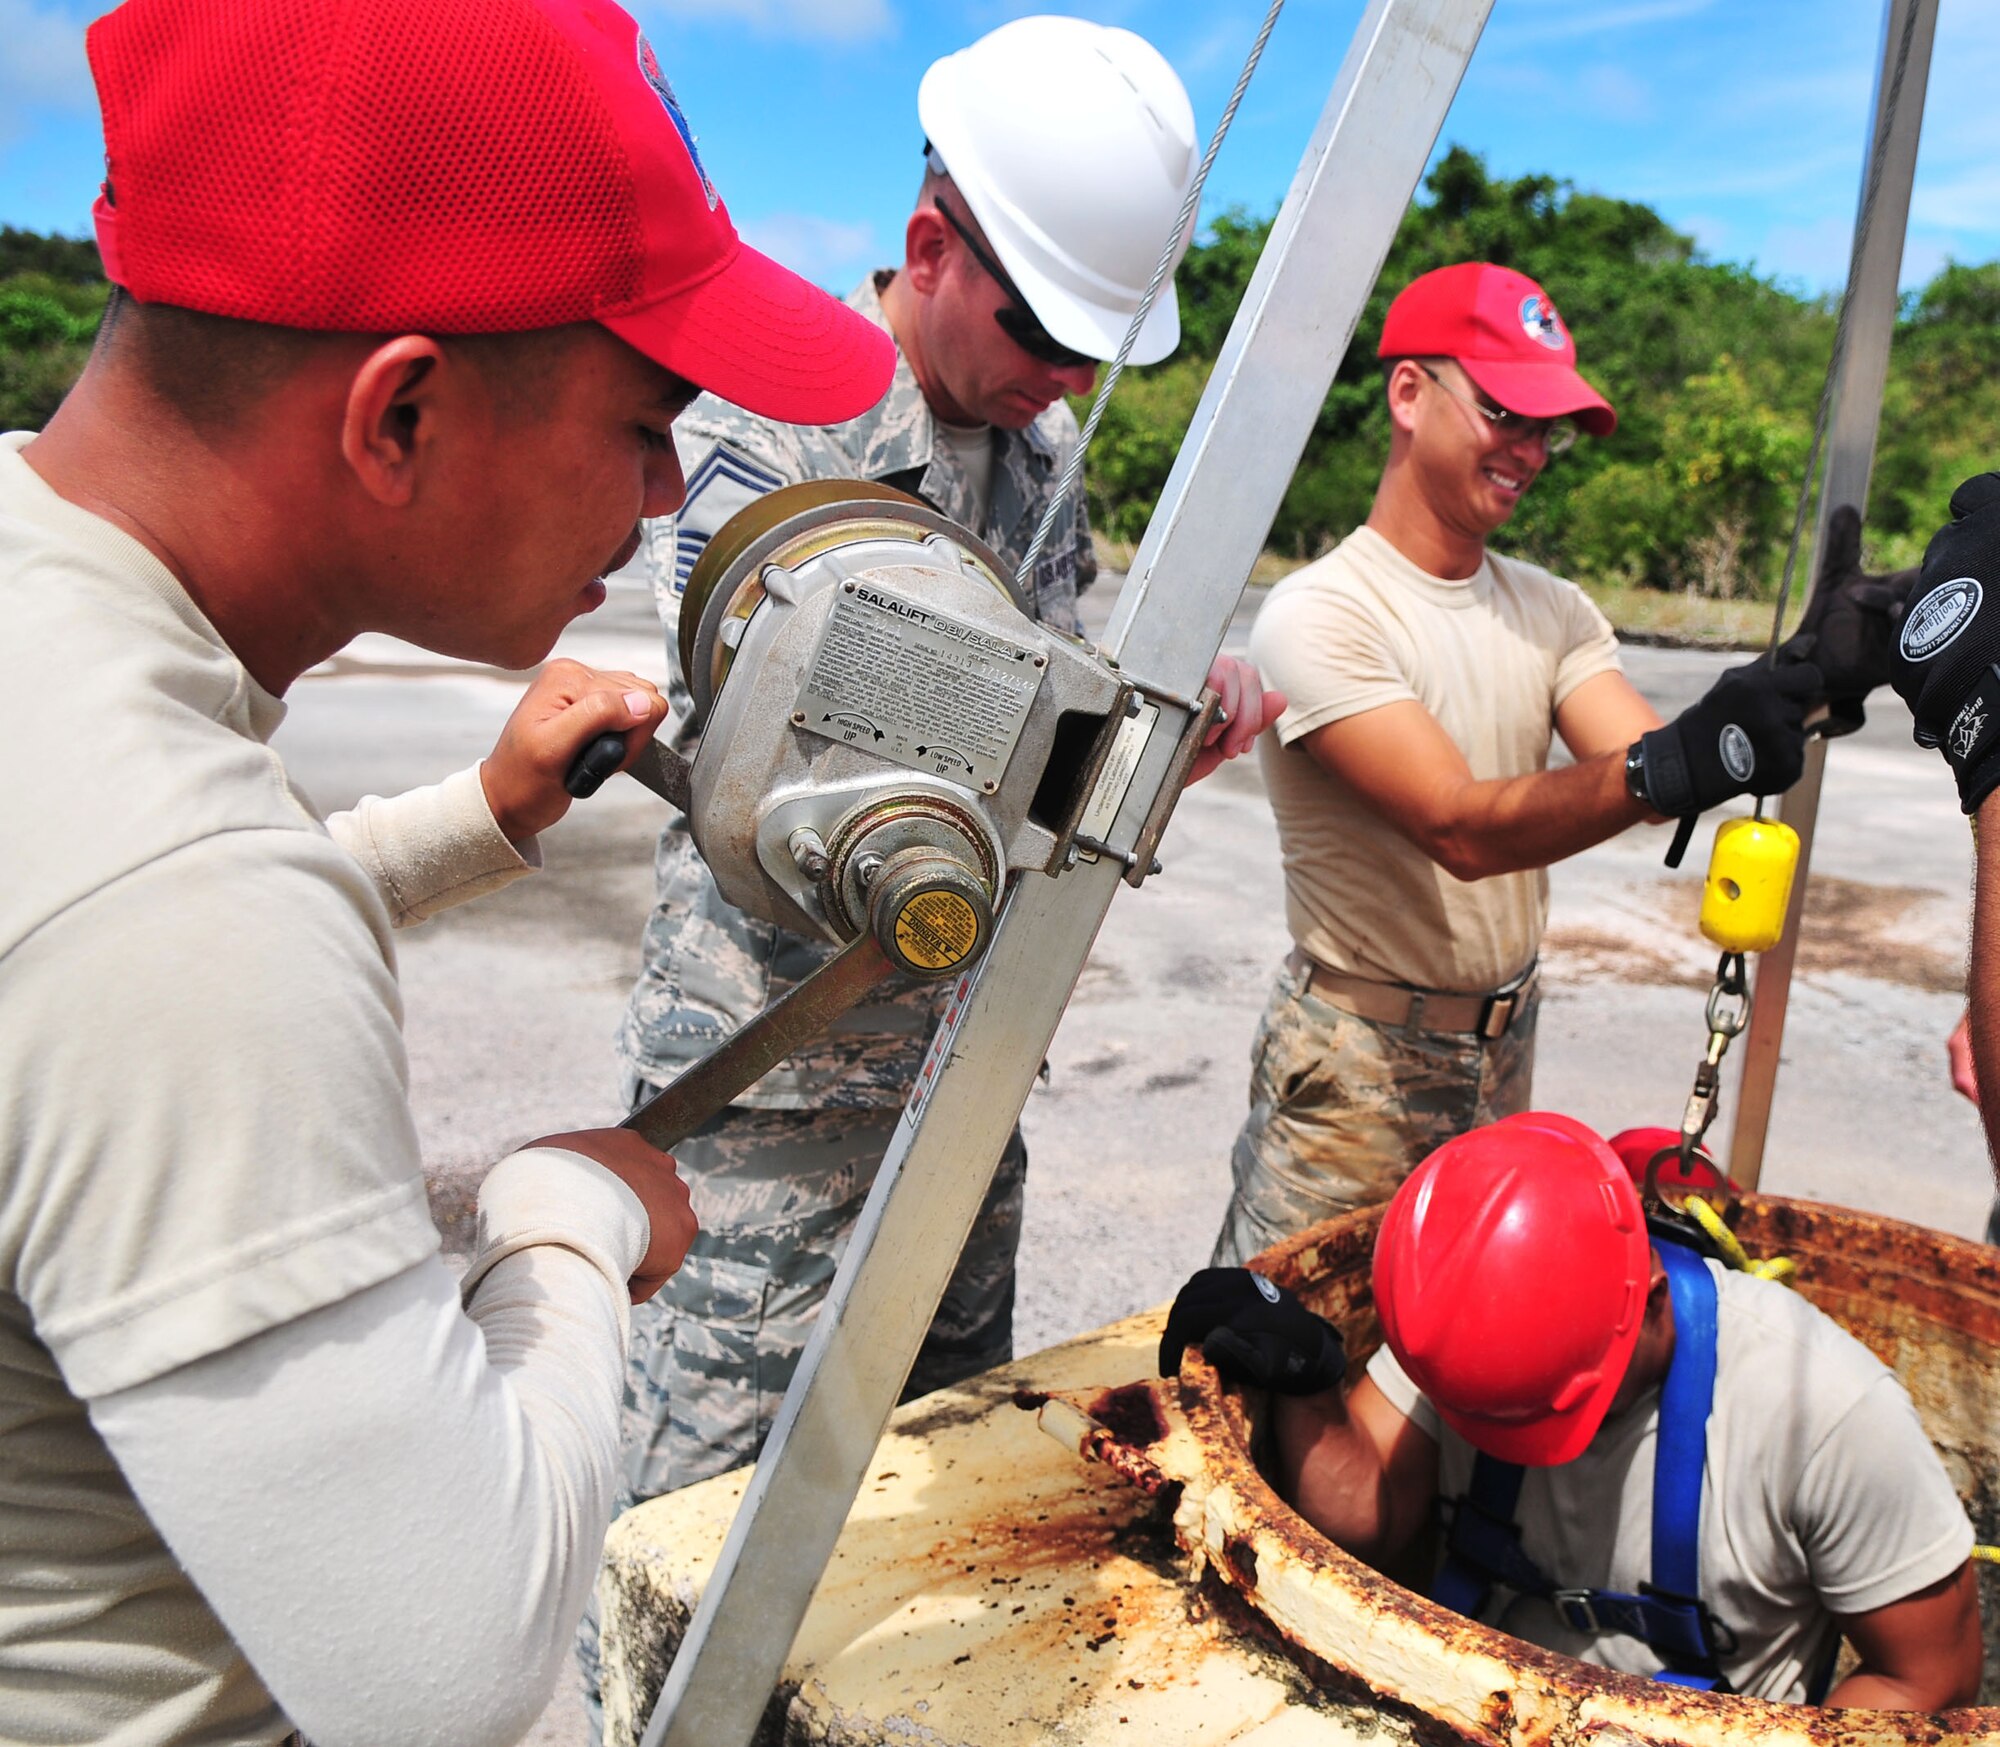 ANDERSEN AIR FORCE BASE, Guam - ANDERSEN AIR FORCE BASE, Guam - Members of the 554th Red Horse Squadronparticipate in confined space training here on Feb. 23. The confined spacetraining is a yearly requirement for certain airmen and was held by 36thWing Safety.(U.S. Air Force photo by Airman 1st Class Julian North)